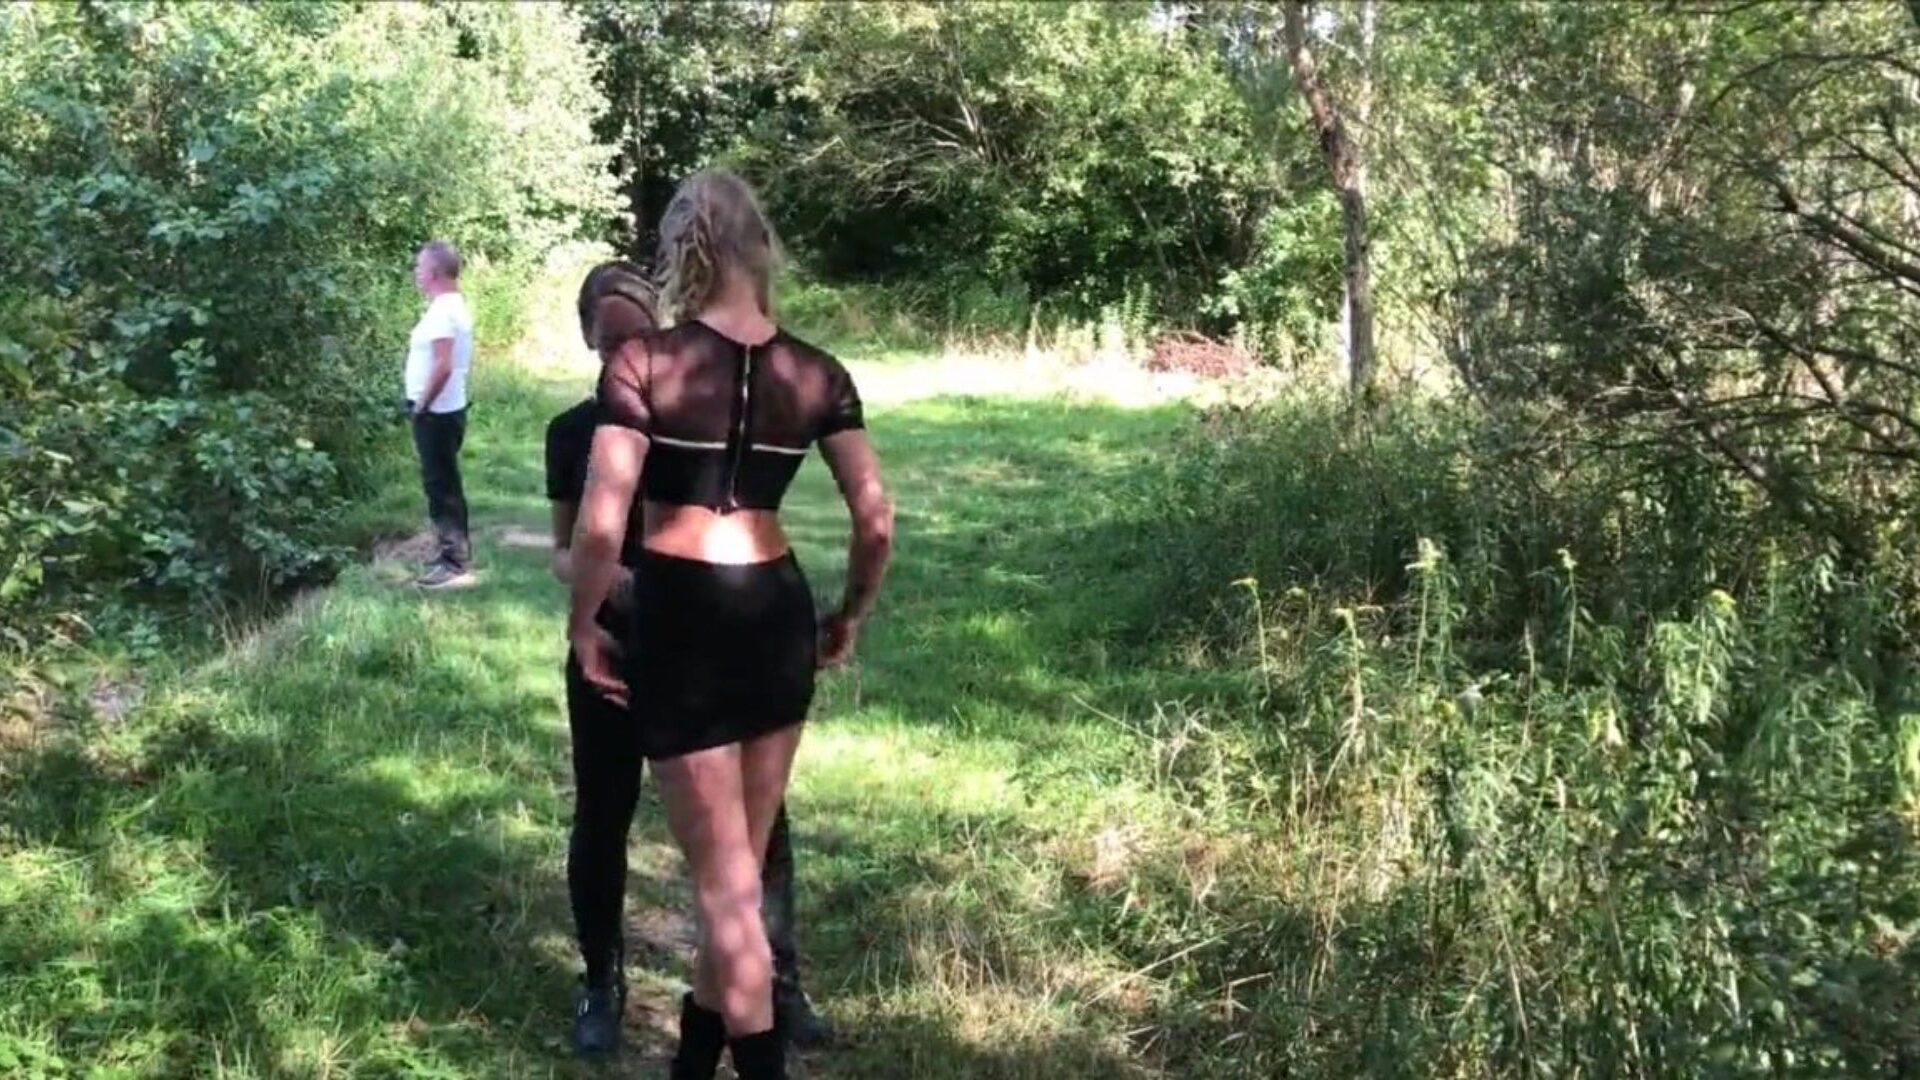 Public Lesbians: Free Sex in the Woods HD Porn Video 33 Watch Public Lesbians tube sex movie scene for free-for-all on xHamster, with the greatest collection of Dutch Sex in the Woods & Blonde HD pornography episode episodes